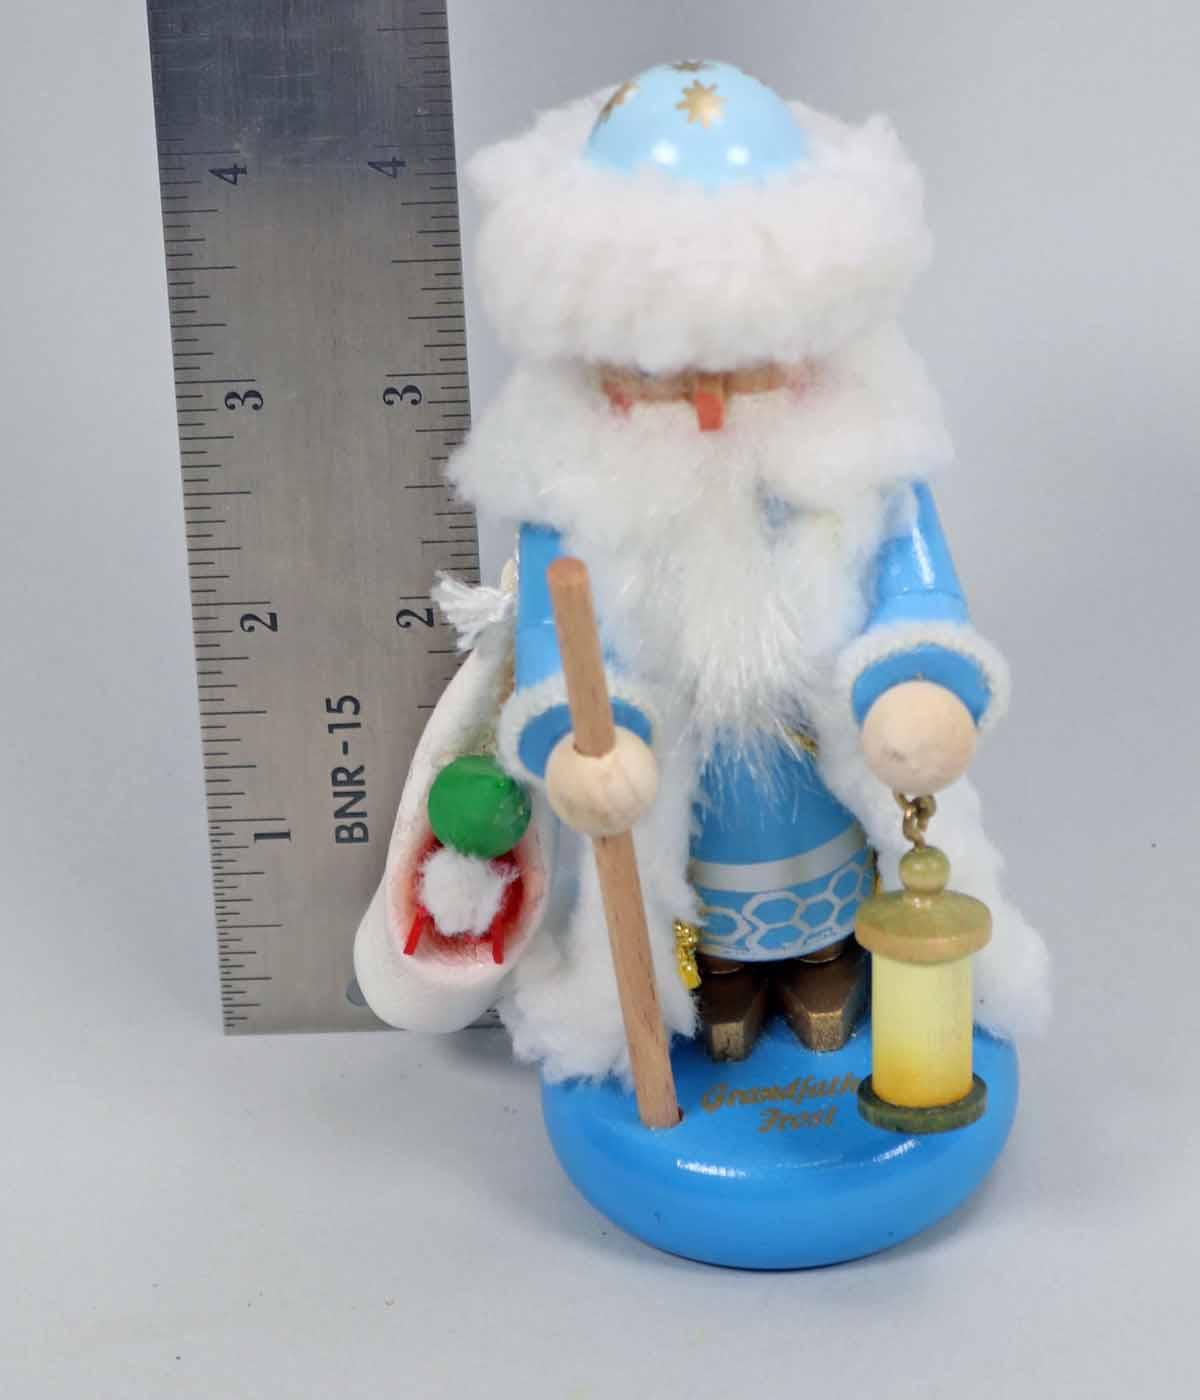 Steinbach "Grandfather Frost" Limited Edition Wooden Figurine